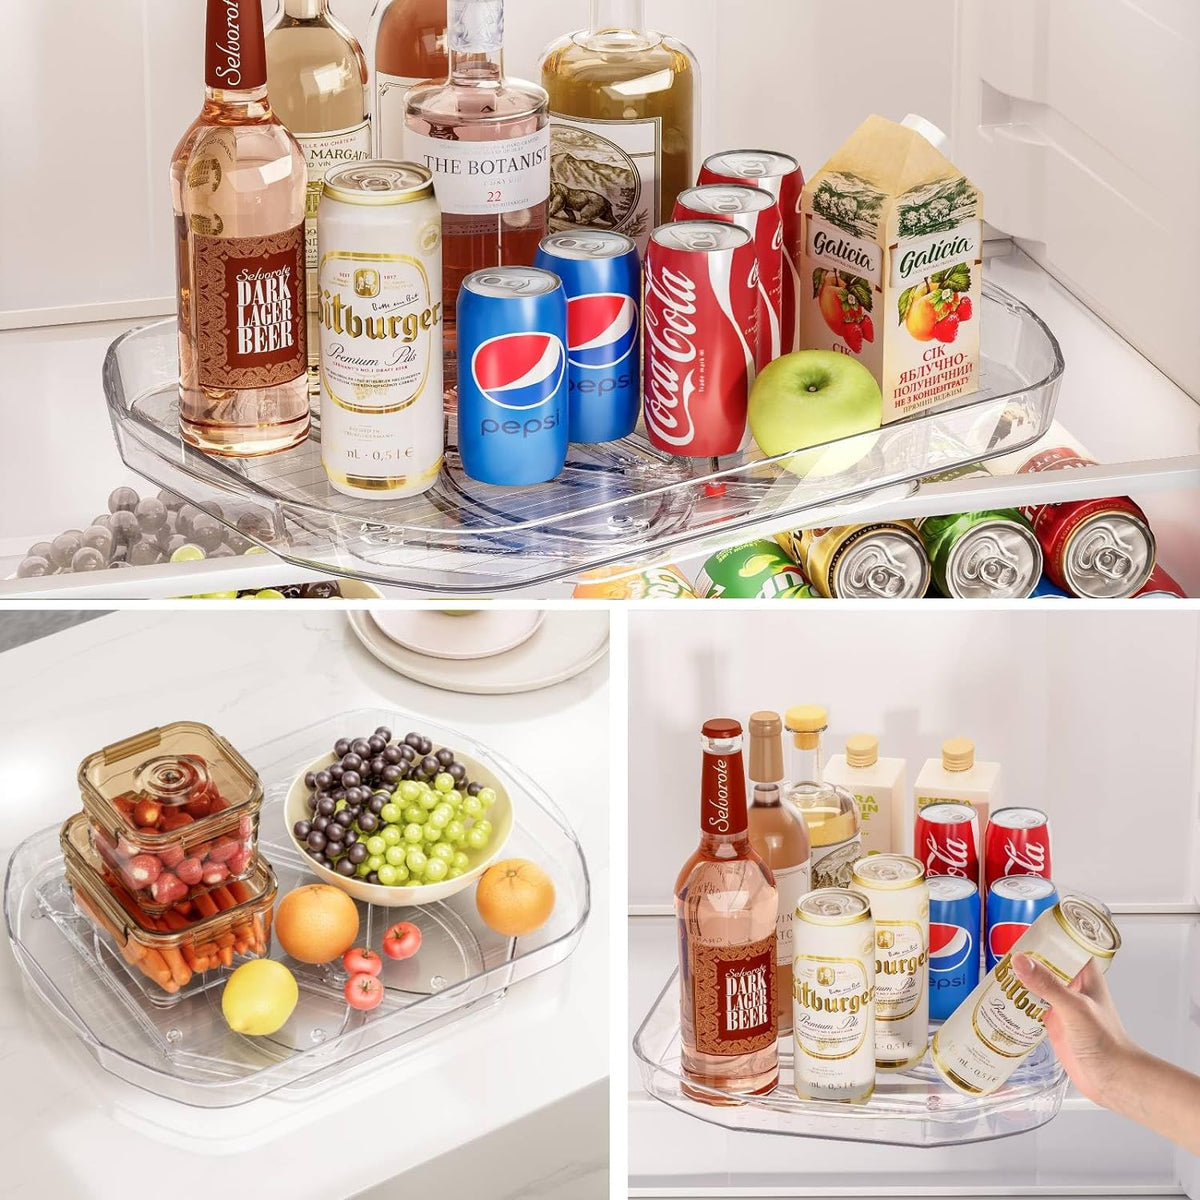 Upgraded Refrigerator Lazy Susan | Rectangular Lazy Susan for Fridge Large Capacity Easy Access | Lazy Susan Revolution for Kitchen Organizers and Pantry Storage -